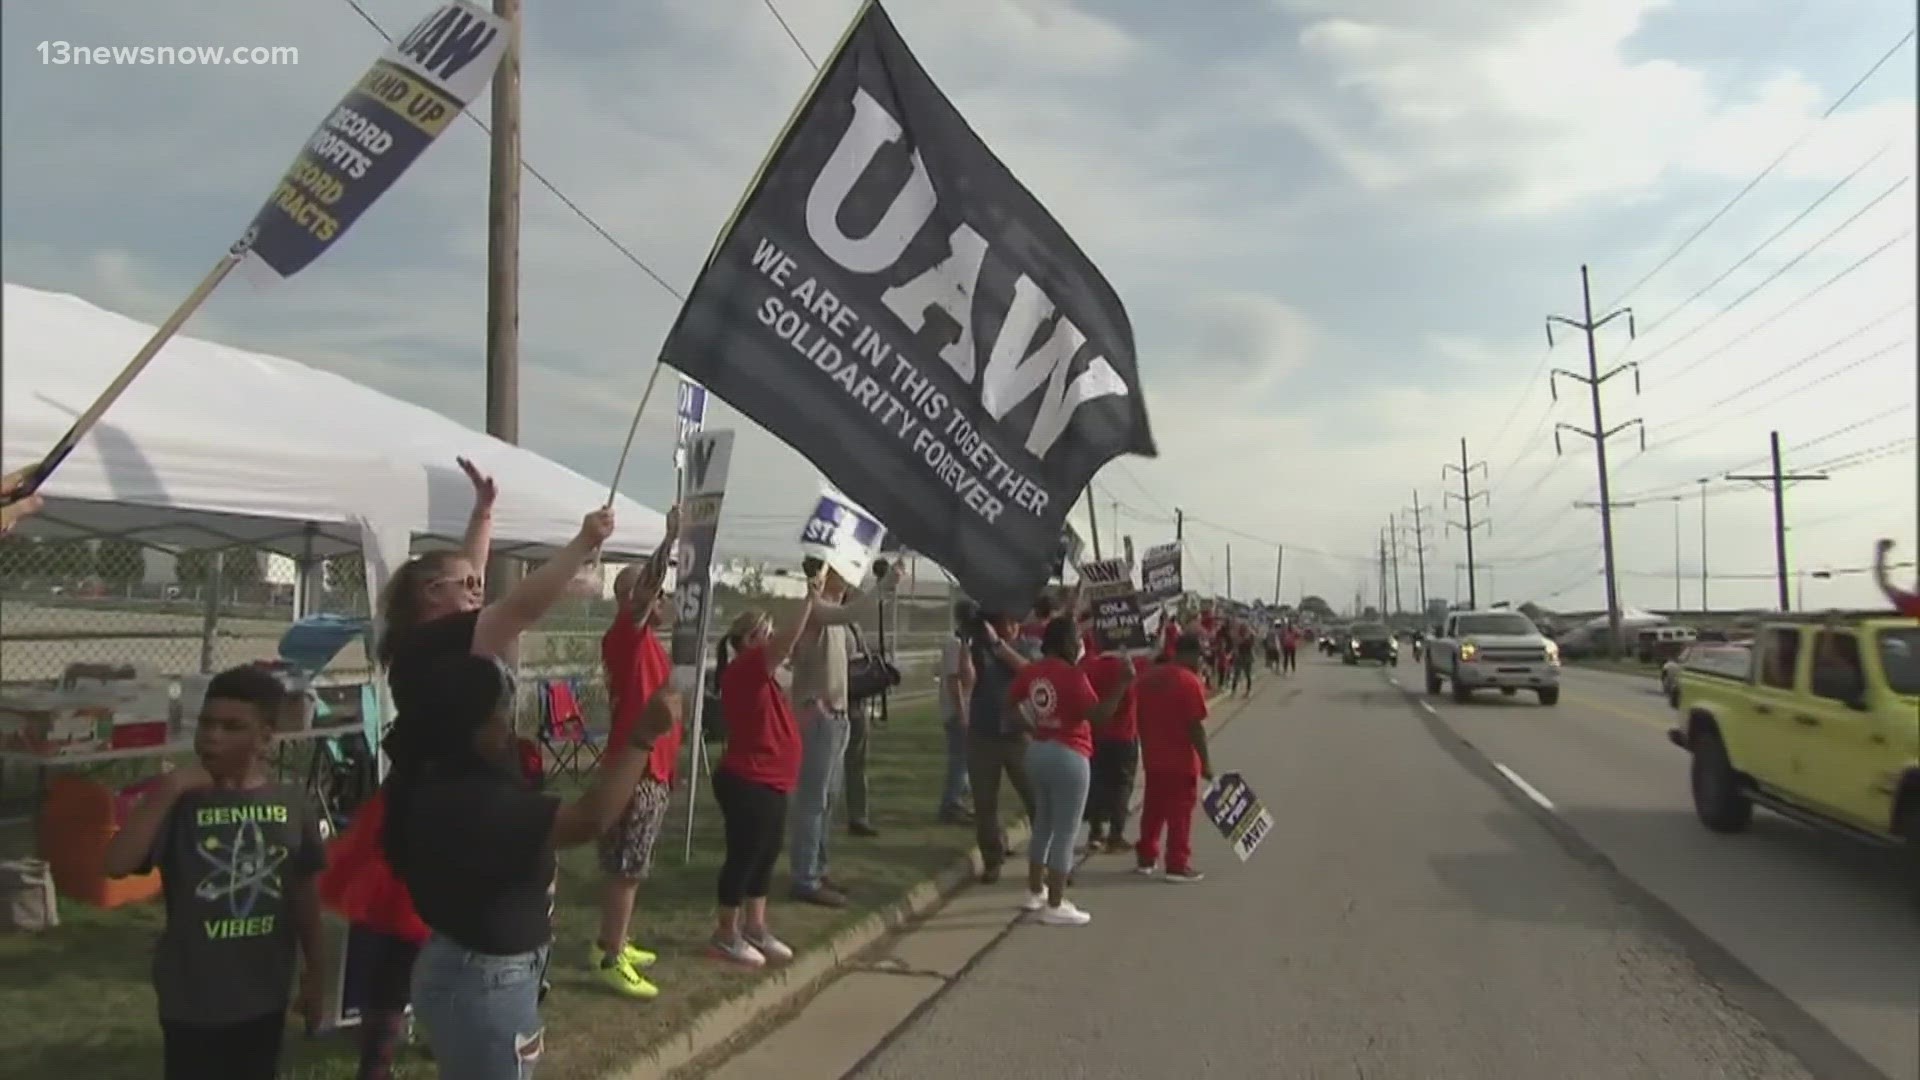 It's day 4 of the UAW strike. The strike is also threatening the livelihoods of workers who haven't walked off the job. Strikers say their needs could be met easily.